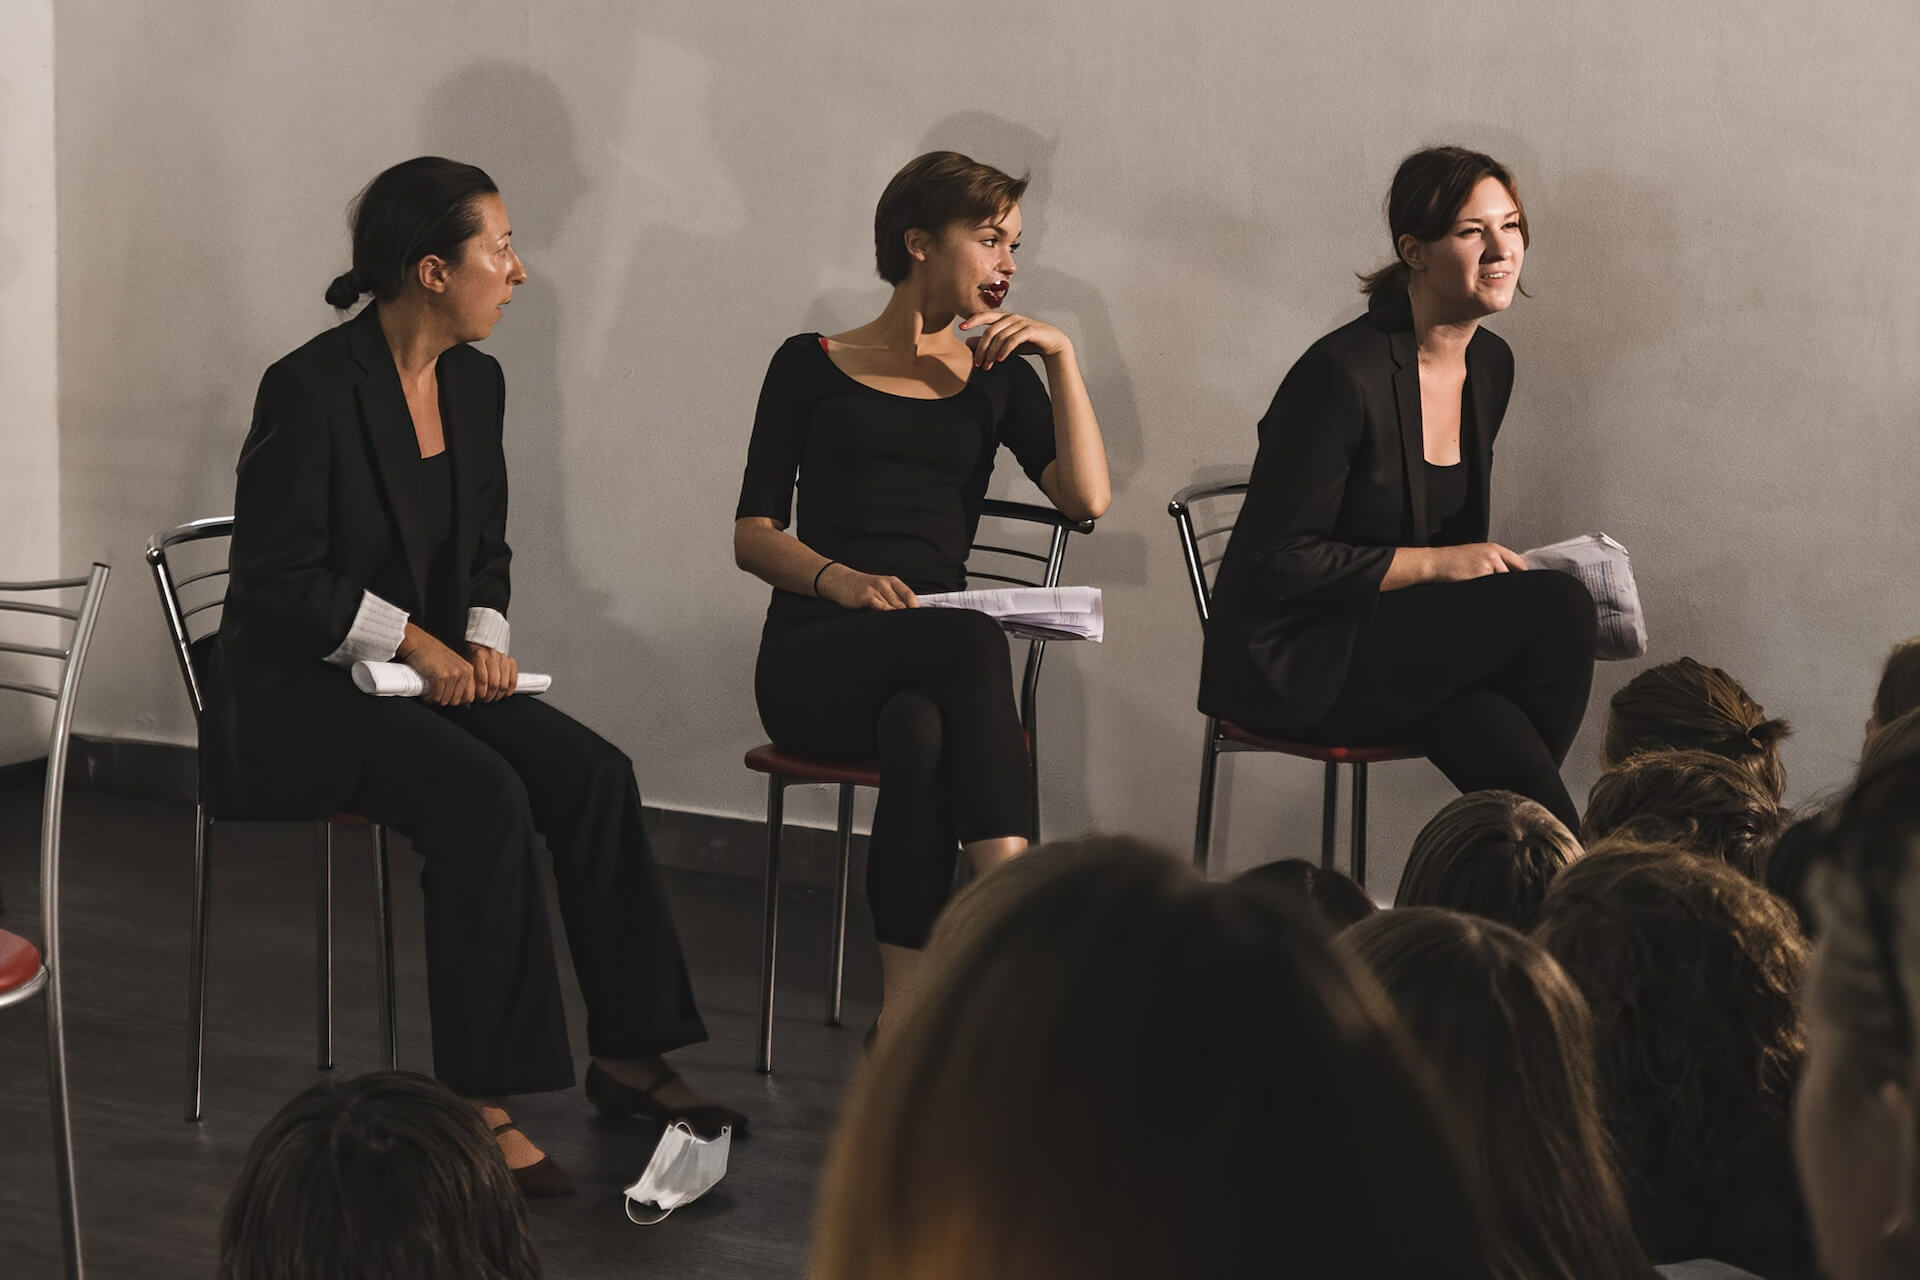 Three performers in black suits are sitting on chairs facing the audience, performing with a script in their hands. One in the middle has a large red sticker on the lips as if they recently got a massive lip filler.